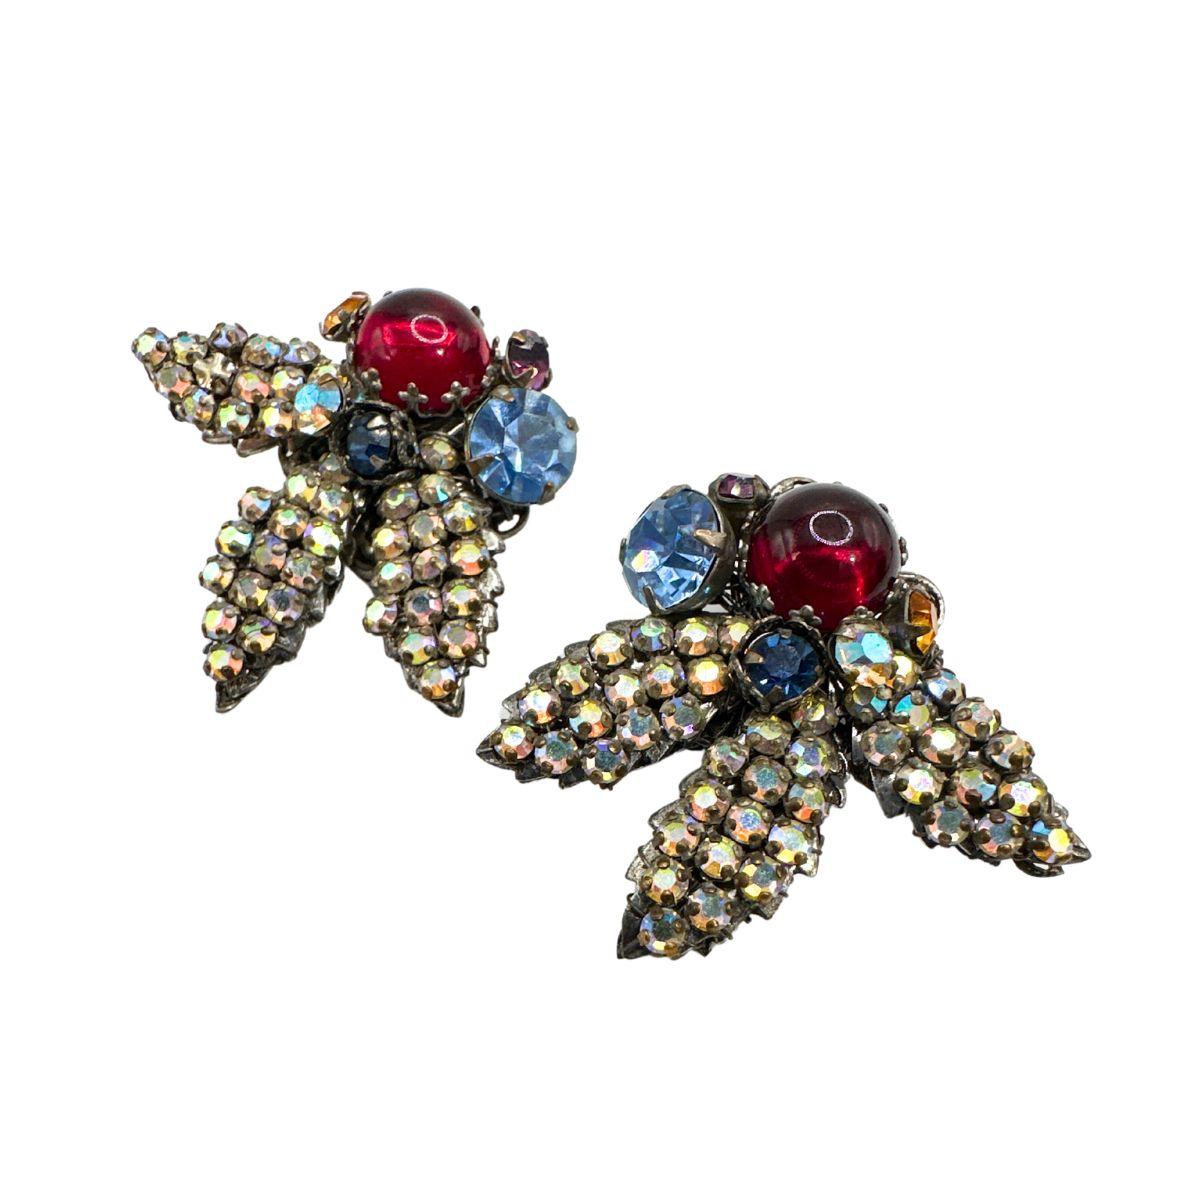 Earring Length:1.48″

Bin Code: E21 / P2

Step back in time with these Antique Earring Vintage Multi-Color Glass and Rhinestone Demario Exceptional Quality Earrings. These earrings are a true testament to the exquisite craftsmanship and exceptional